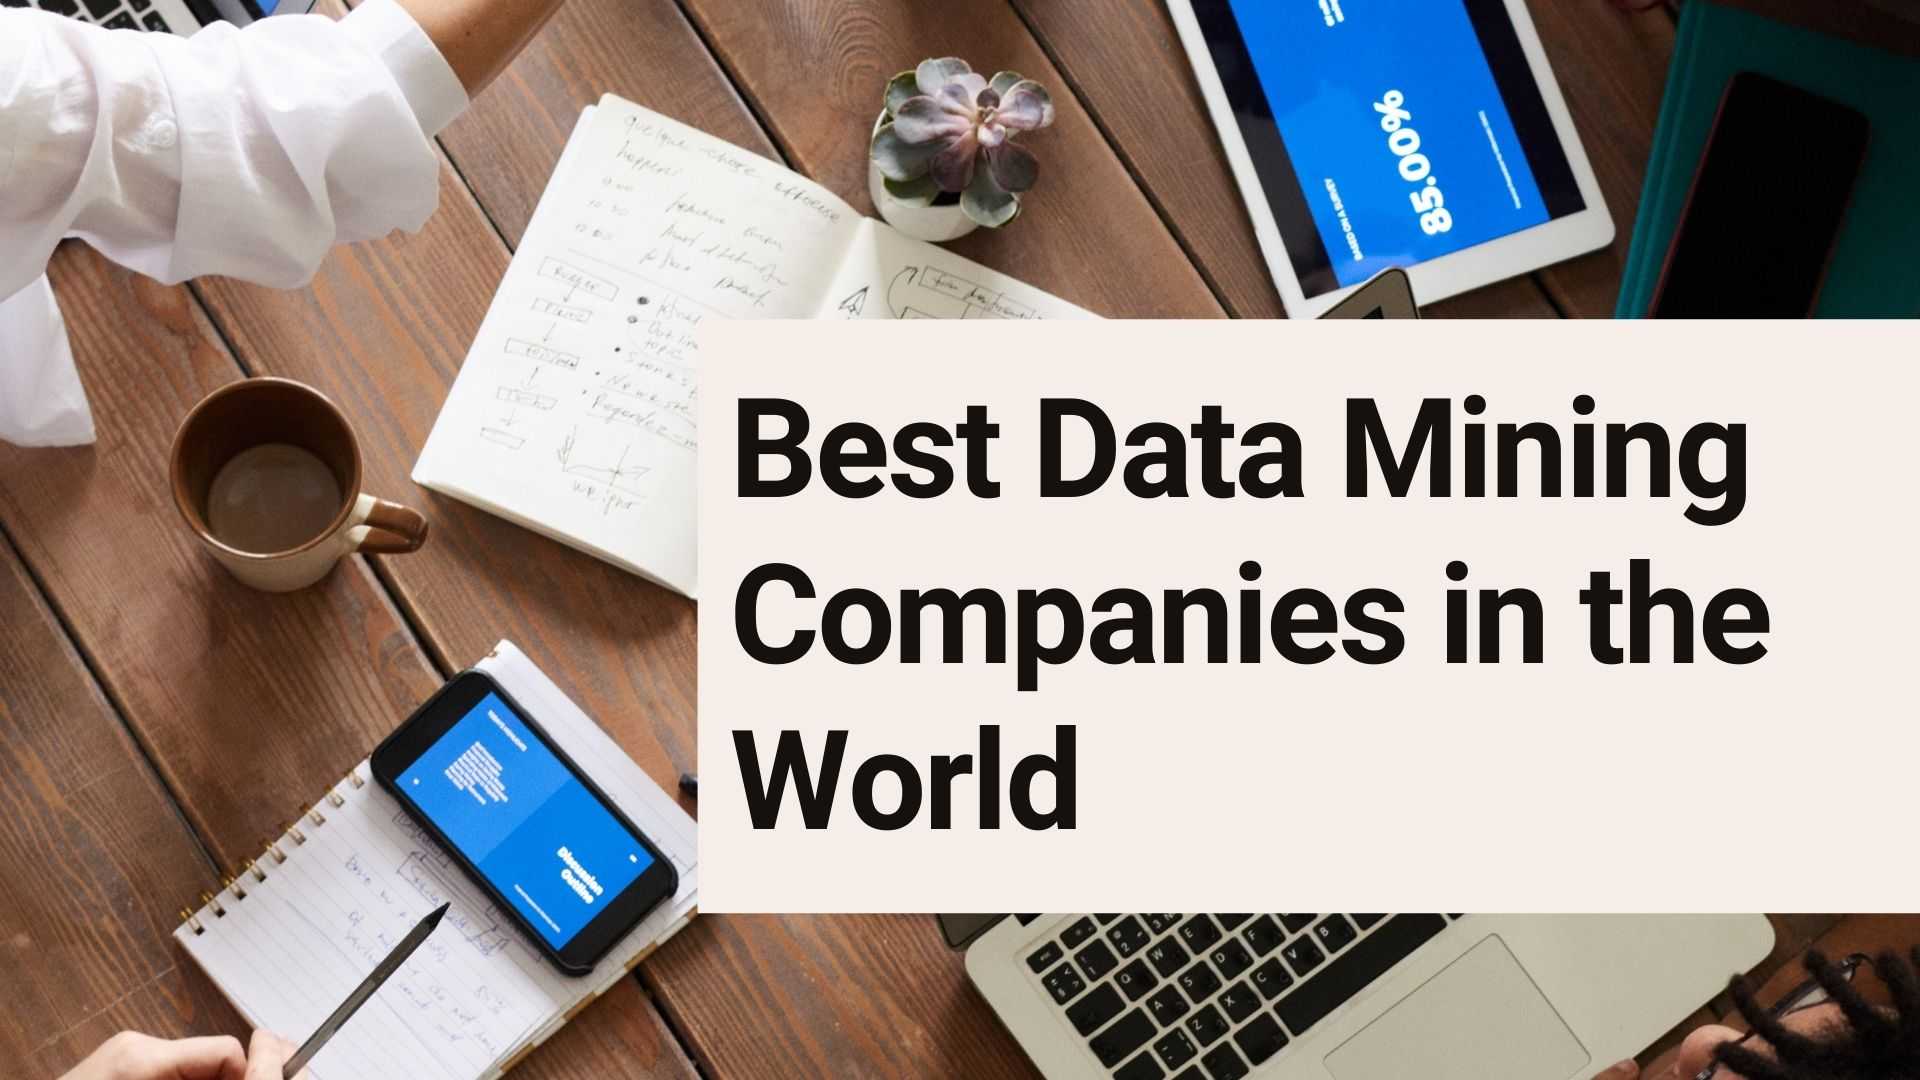 Best Data Mining Companies in the World